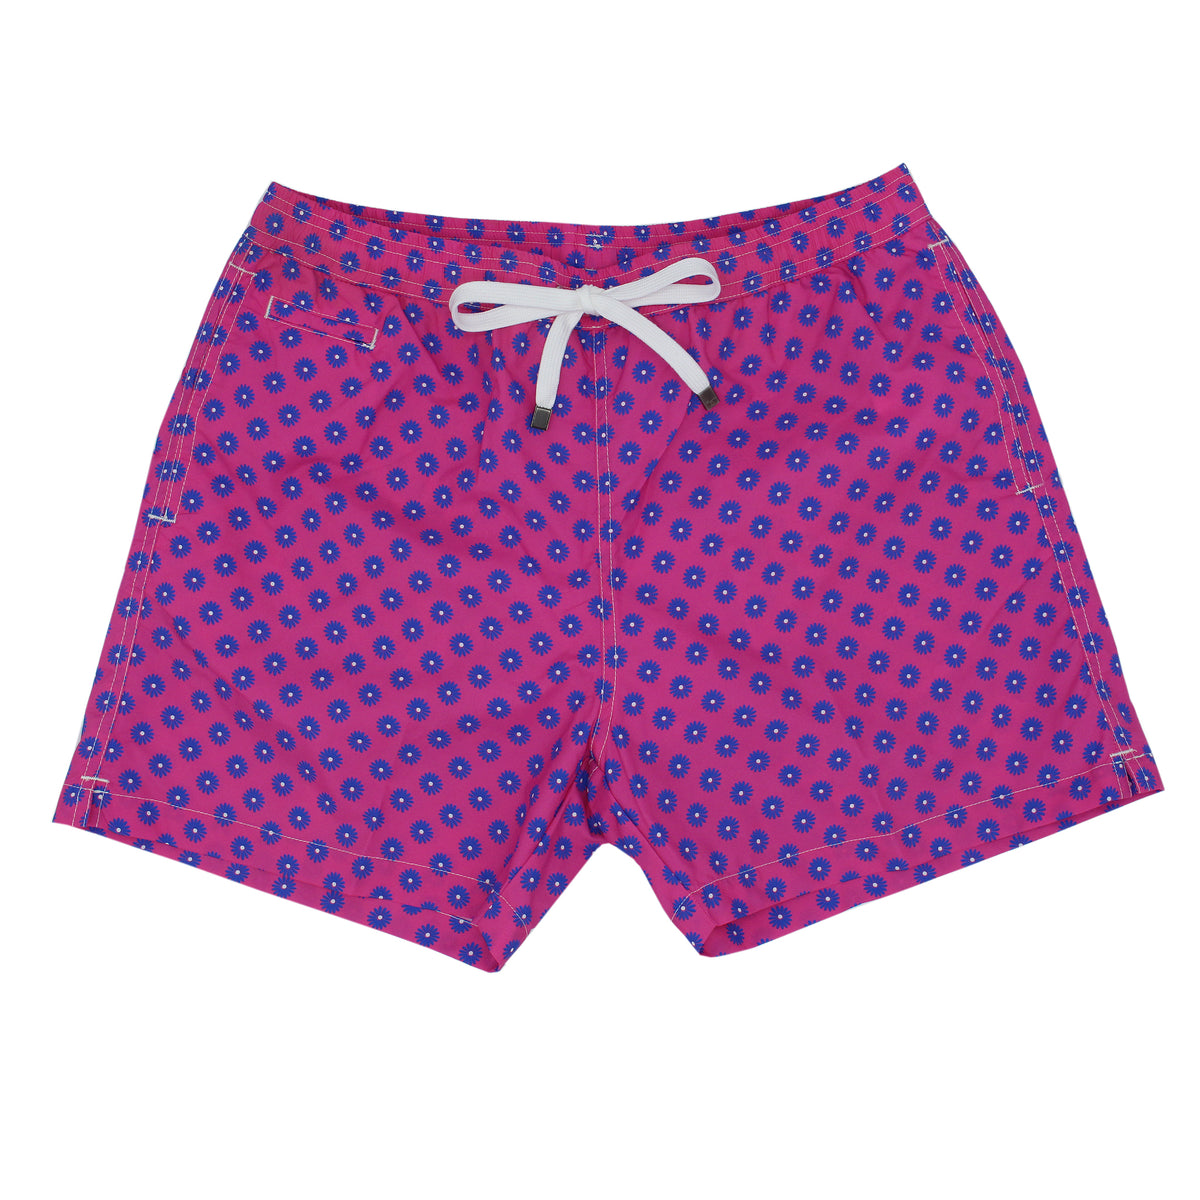 Red or Pink swimming costume with blue flowers. Quick-drying